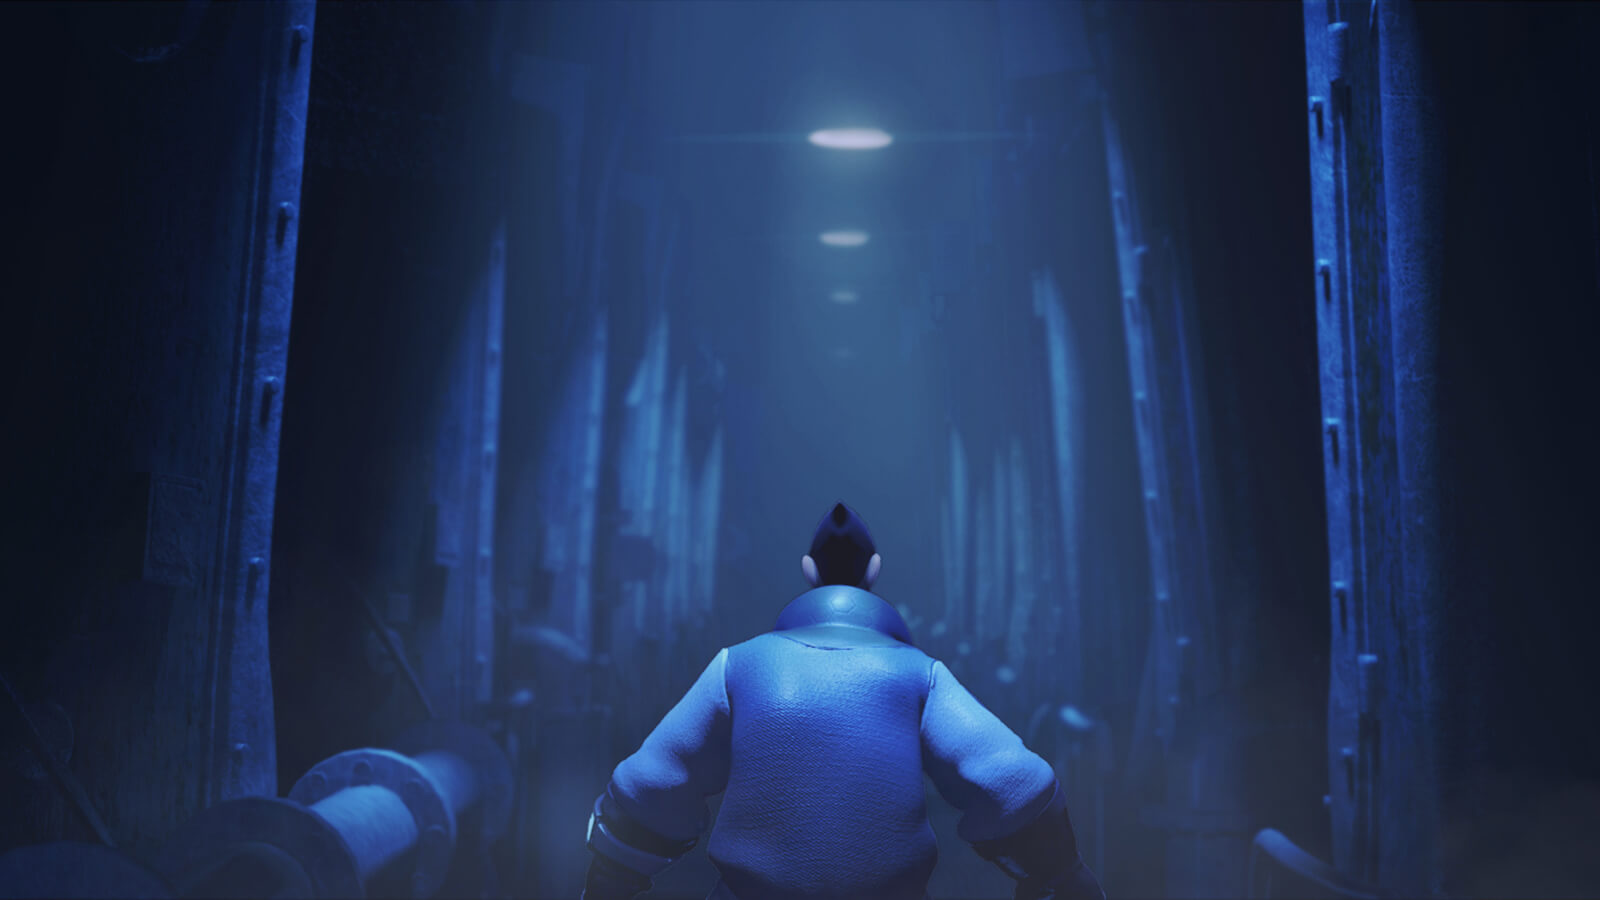 Seen from behind, a man in blue attire walks down an industrial corridor dimly lit from above